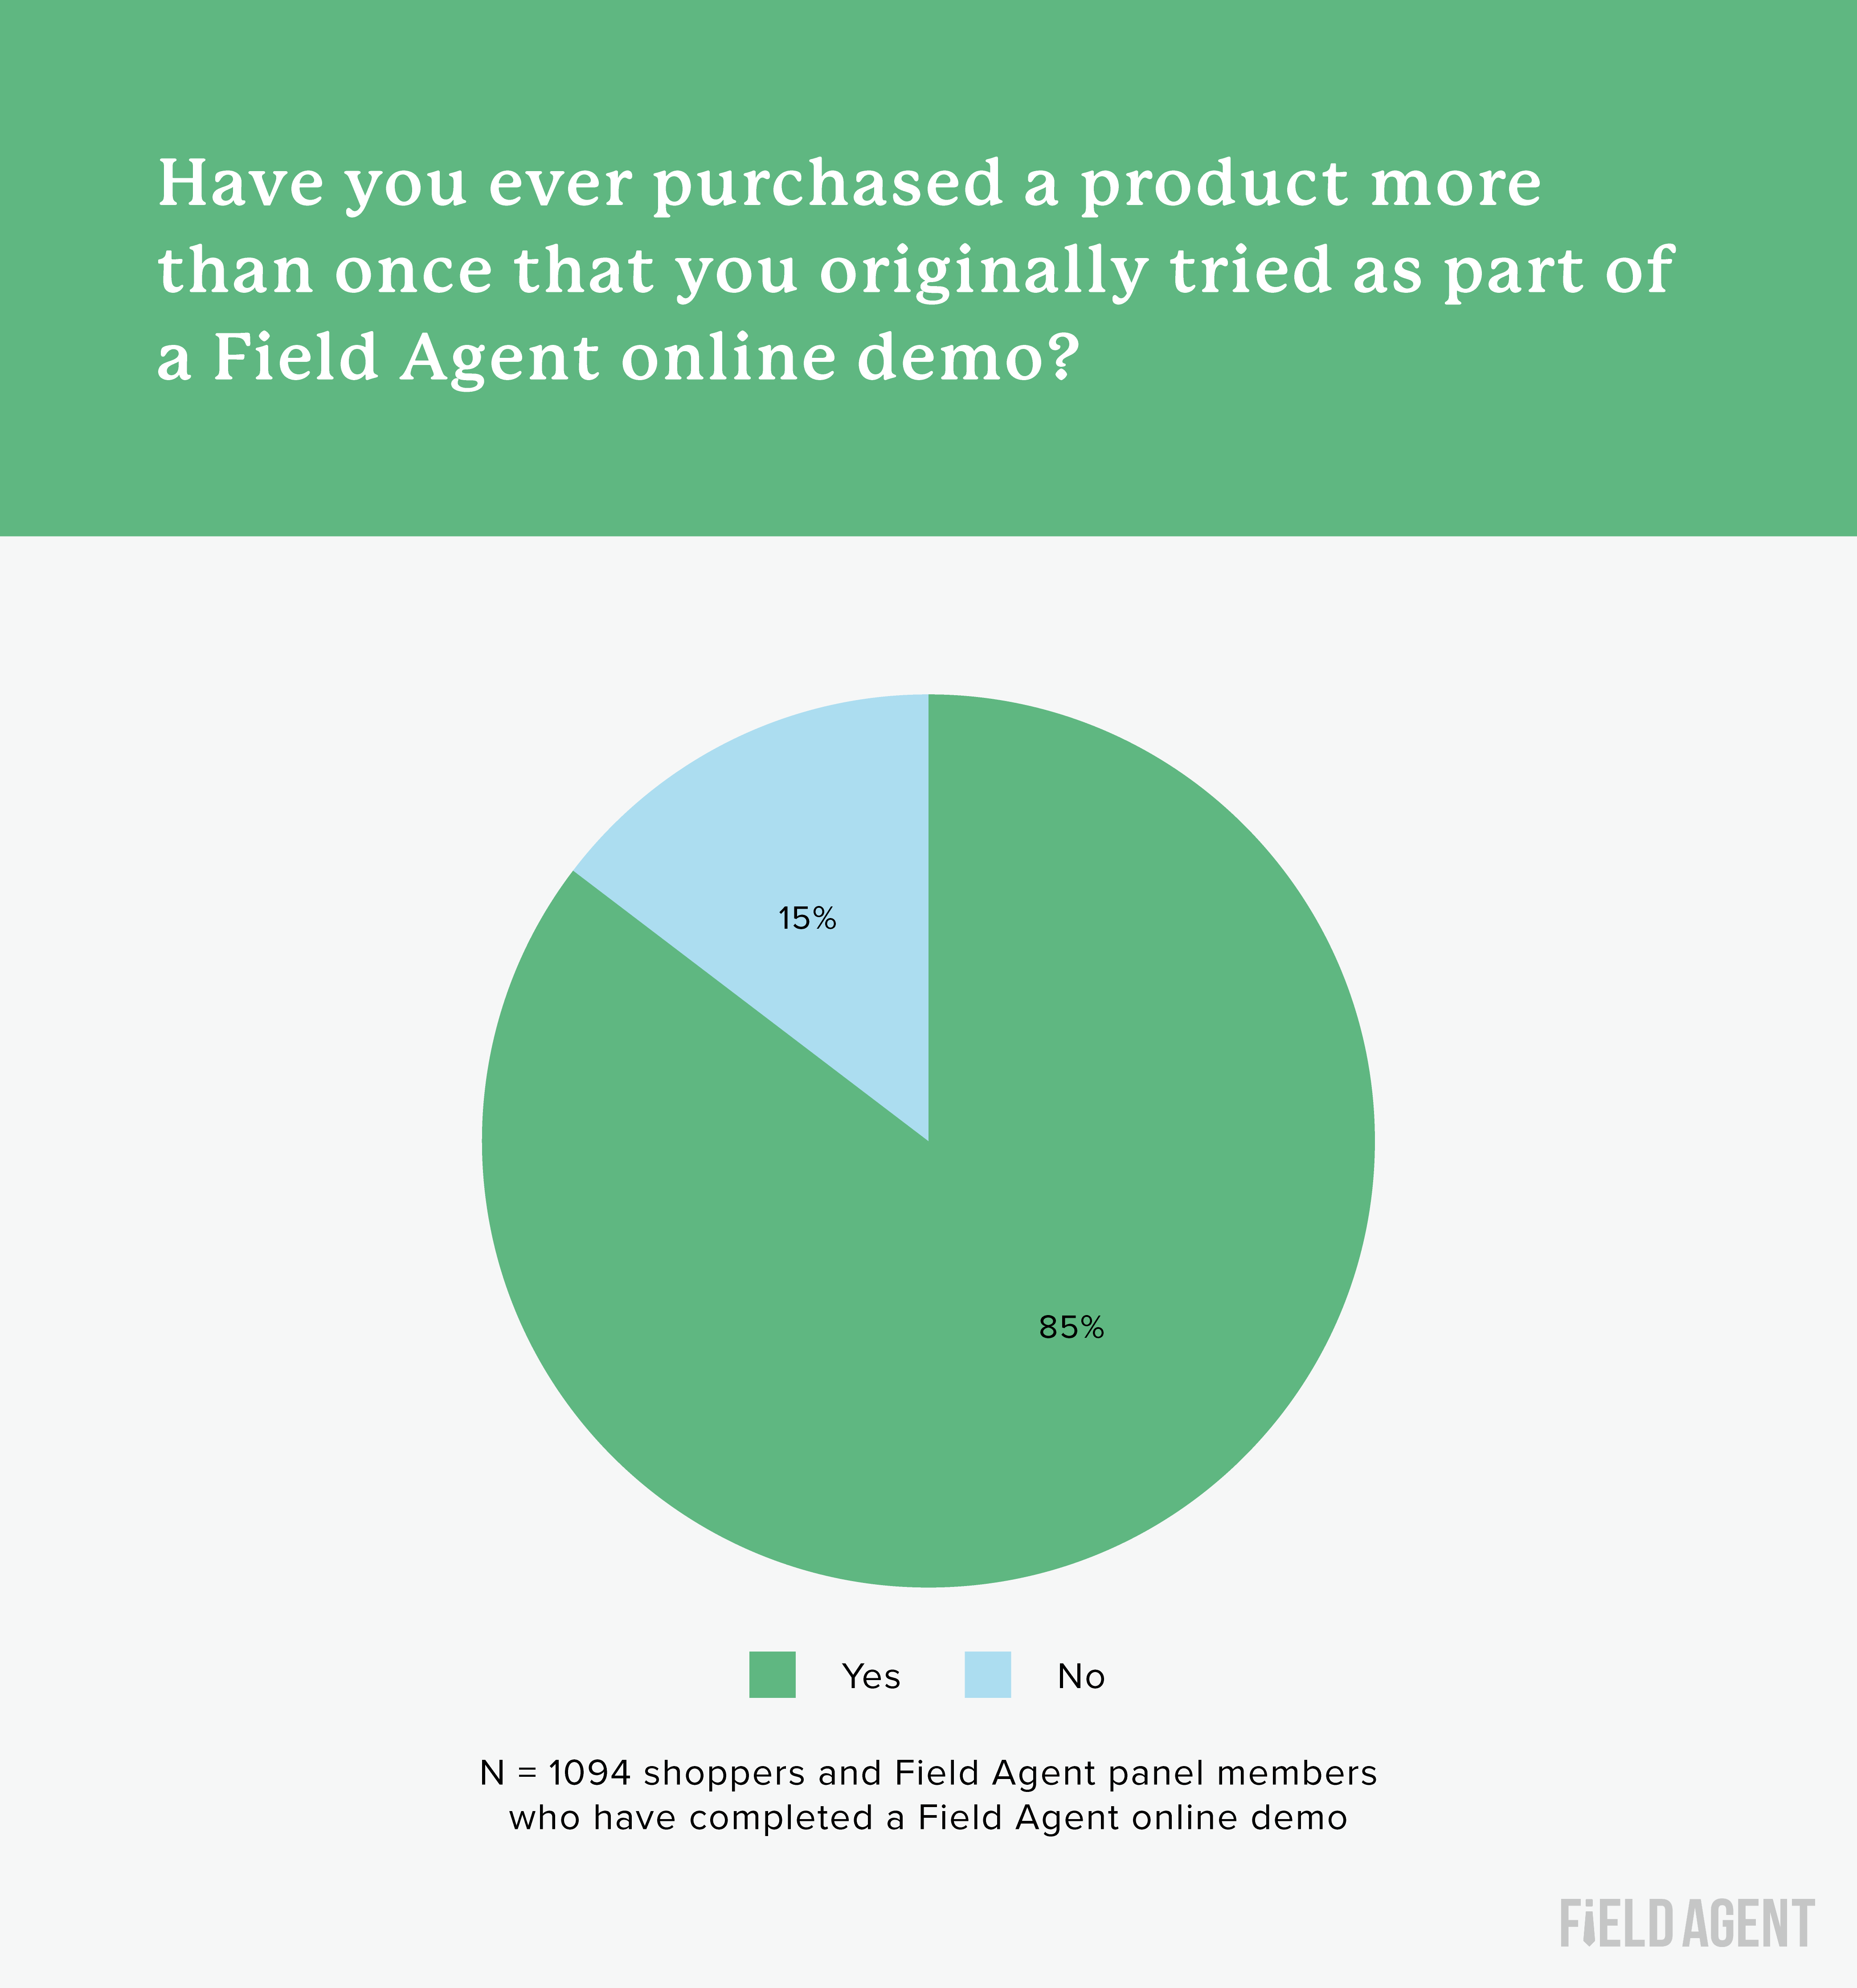 Graph: How many shoppers make repeat purchases of products they originally tried through an online demo